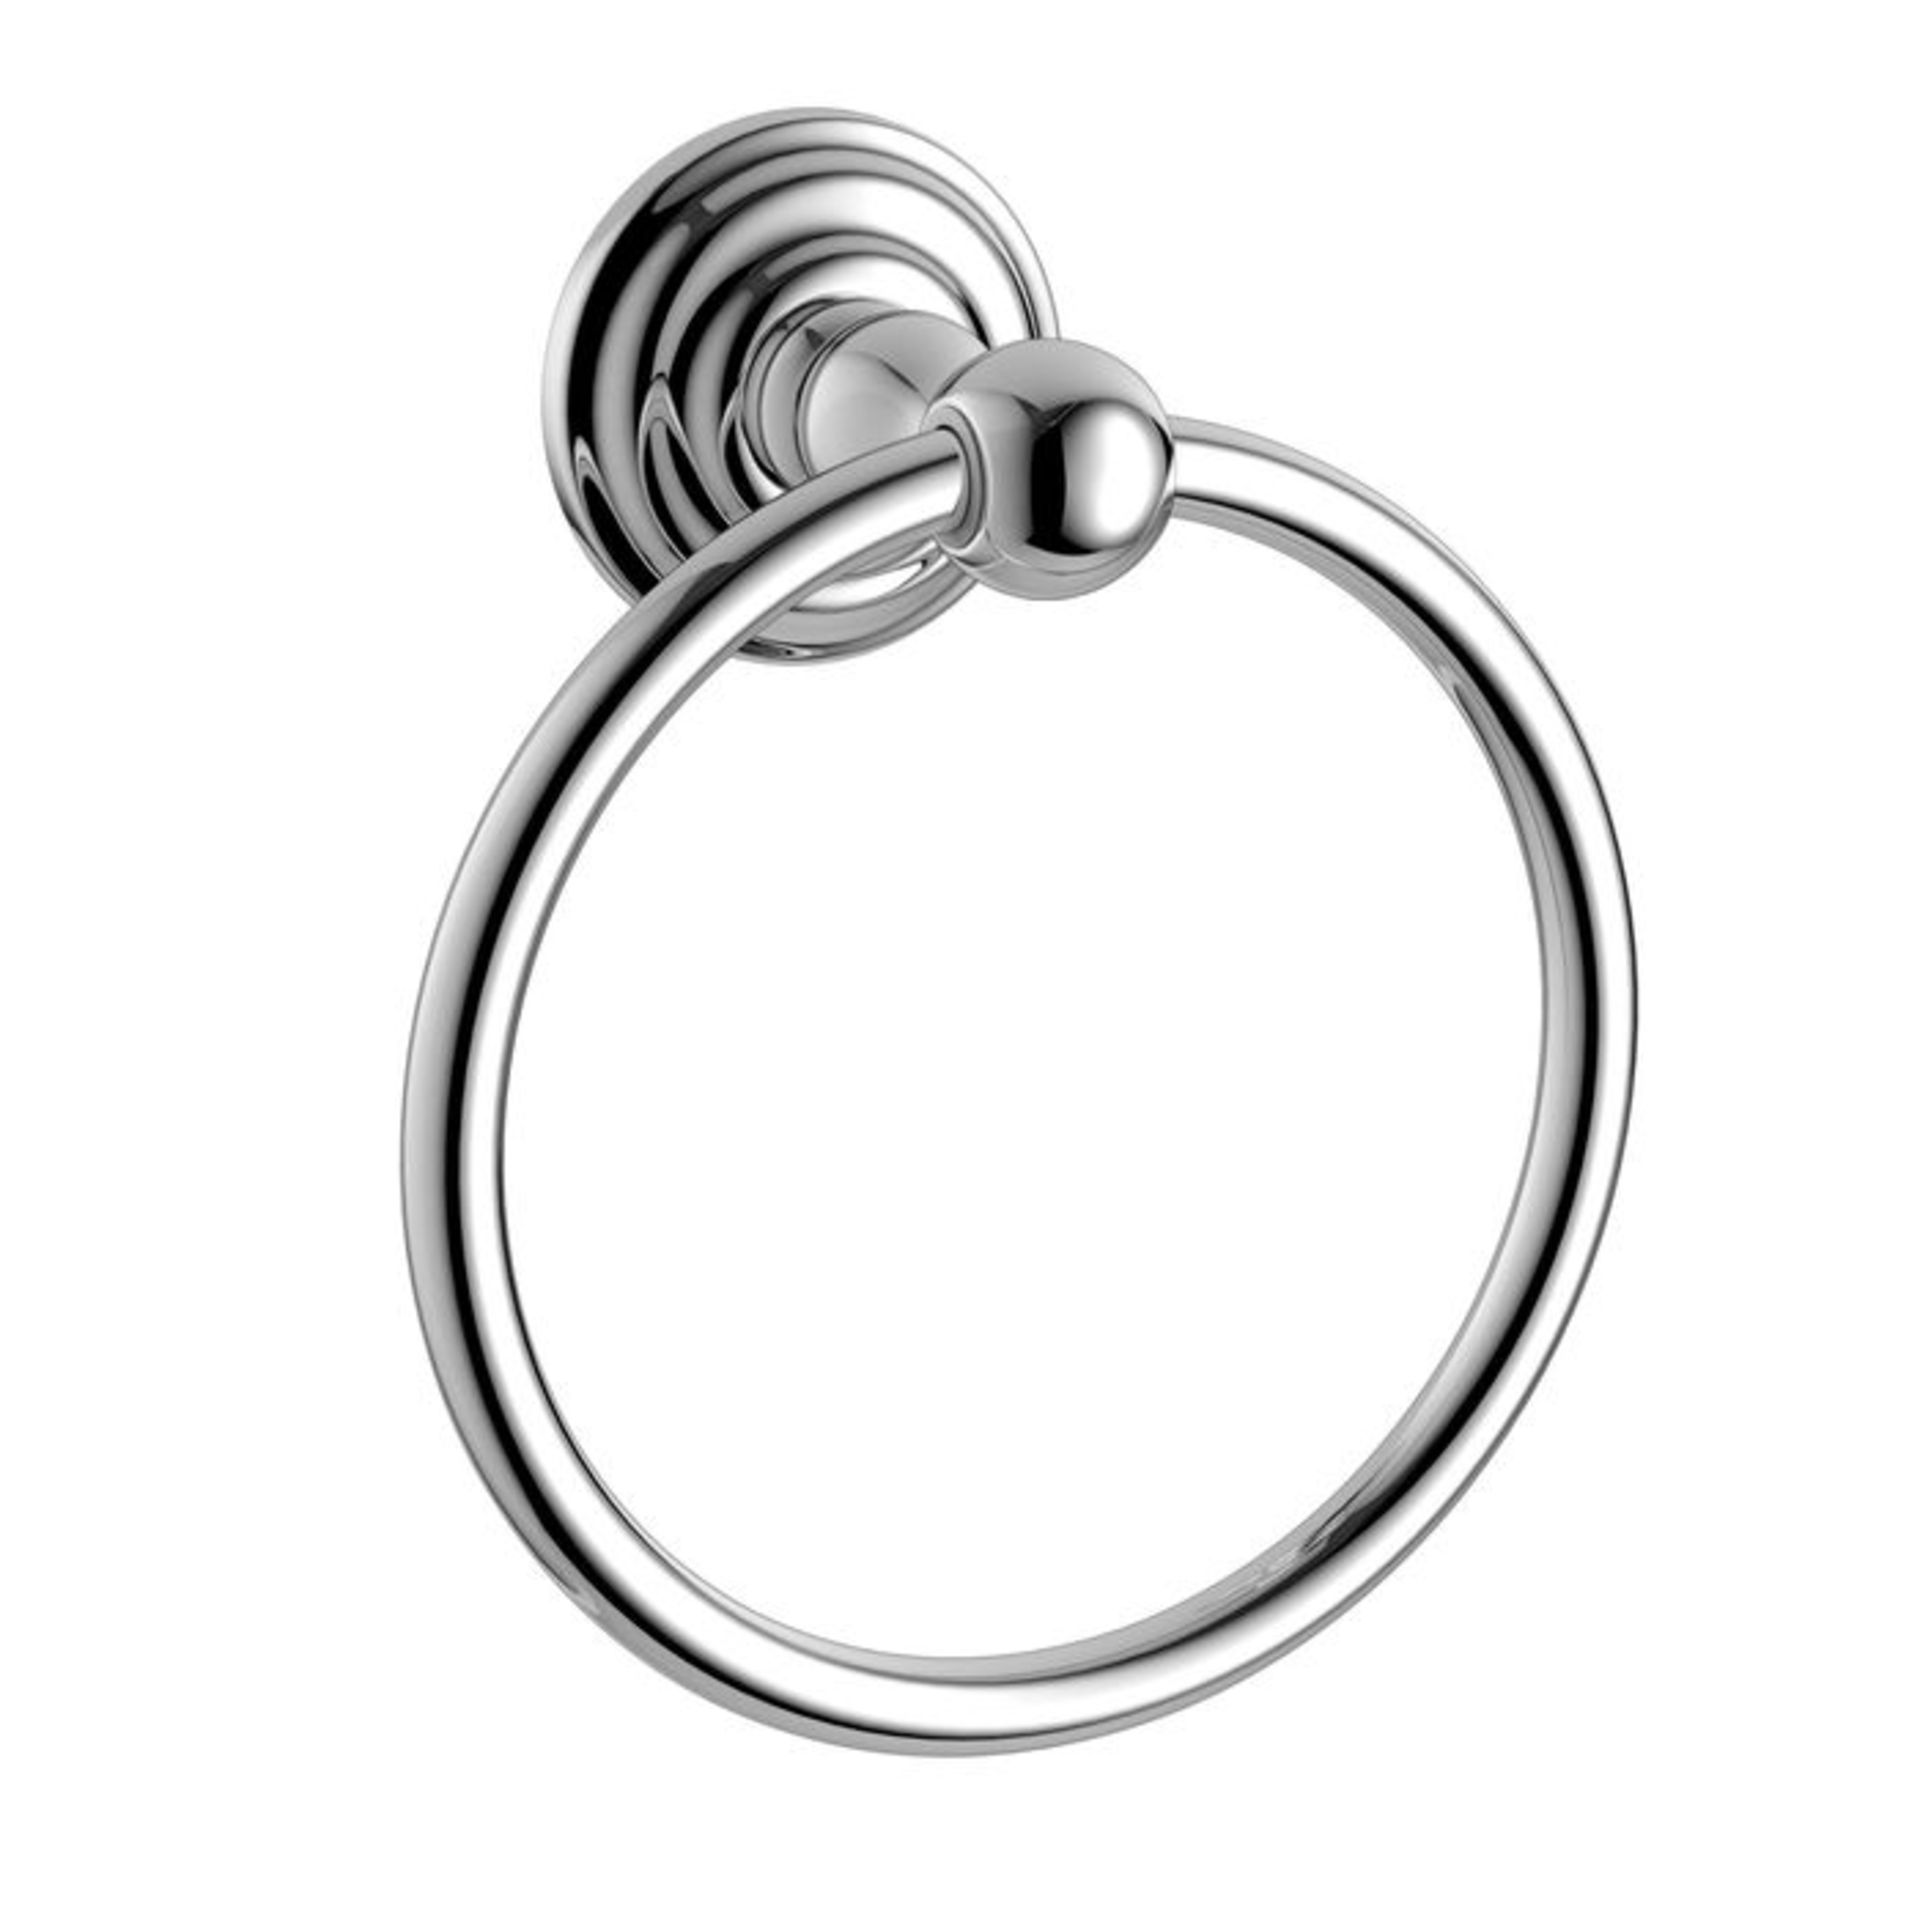 (S142) York Towel Ring 1 Year WarrantyFinishes your bathroom with a little extra functionality and - Image 3 of 3